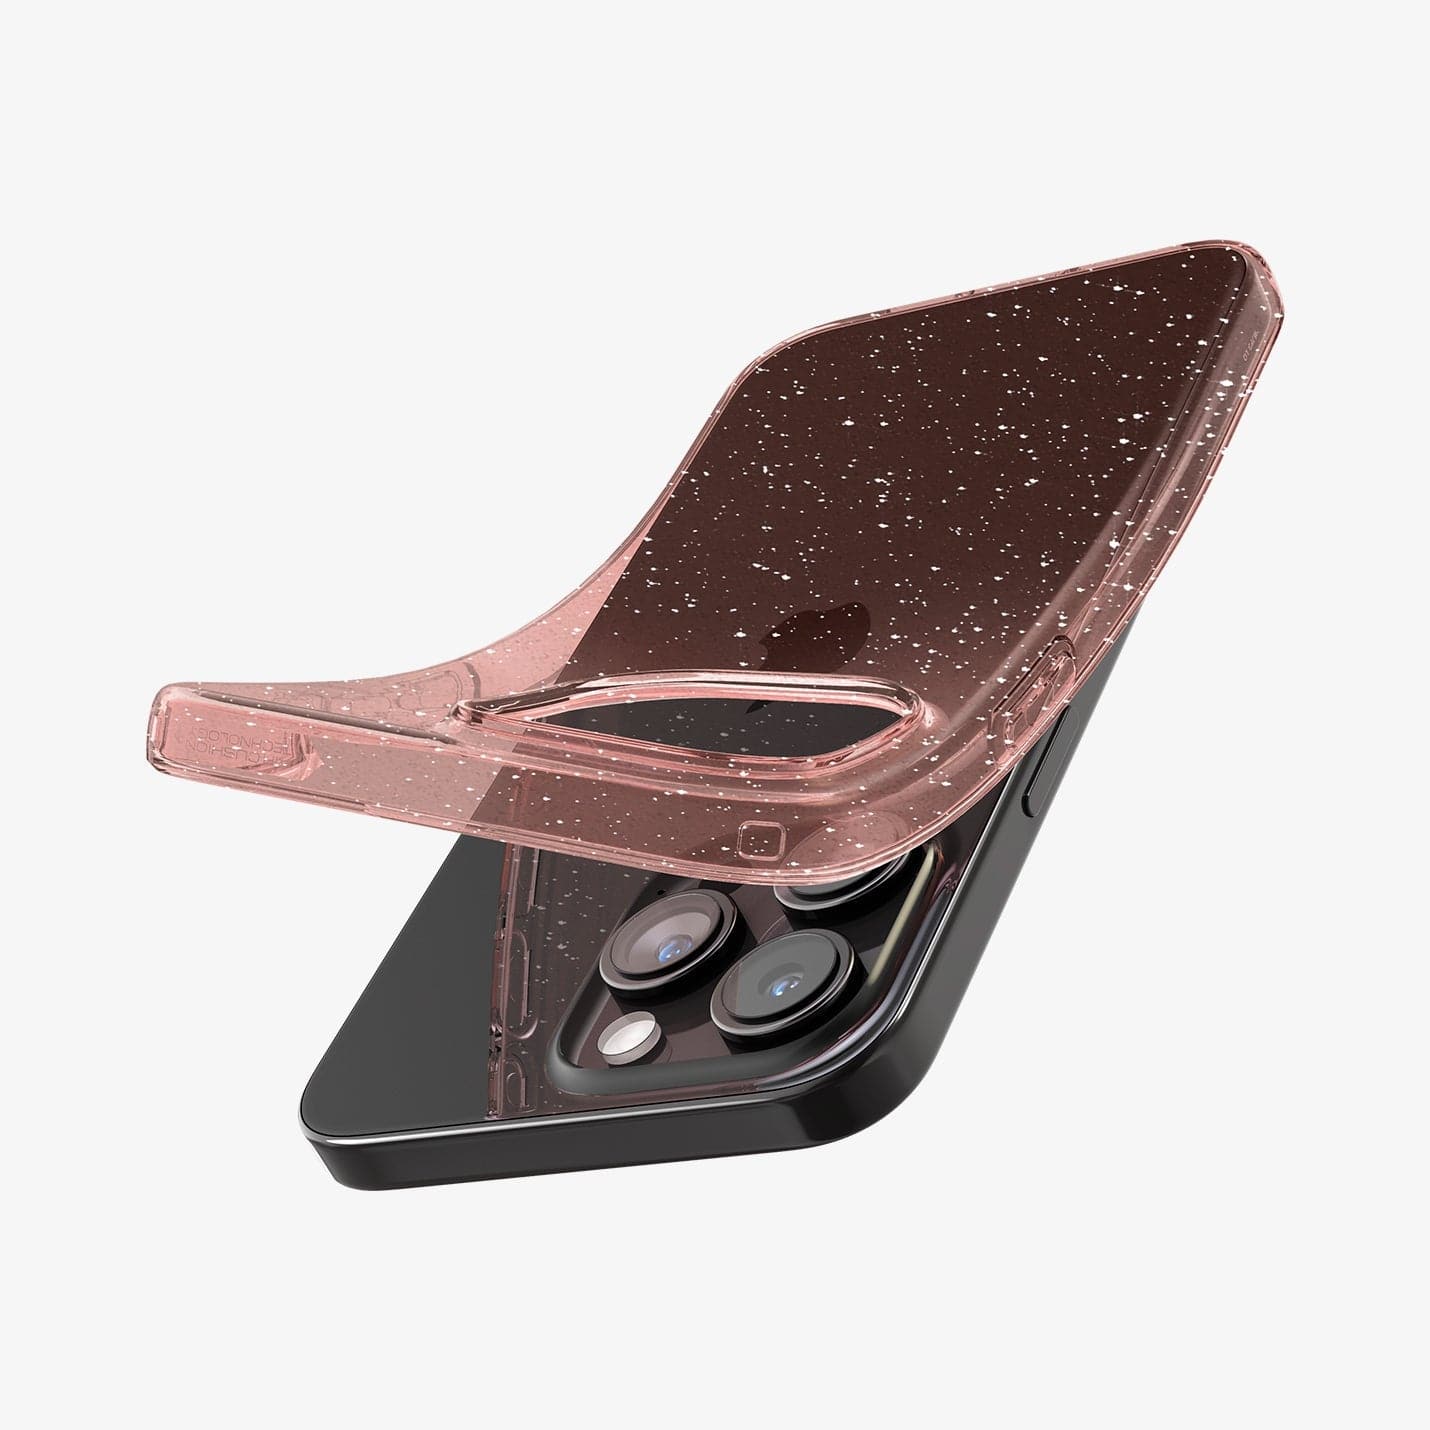 ACS06560 - iPhone 15 Pro Max Case Liquid Crystal Glitter in rose quartz showing the back with case bending away from device to show the flexibility